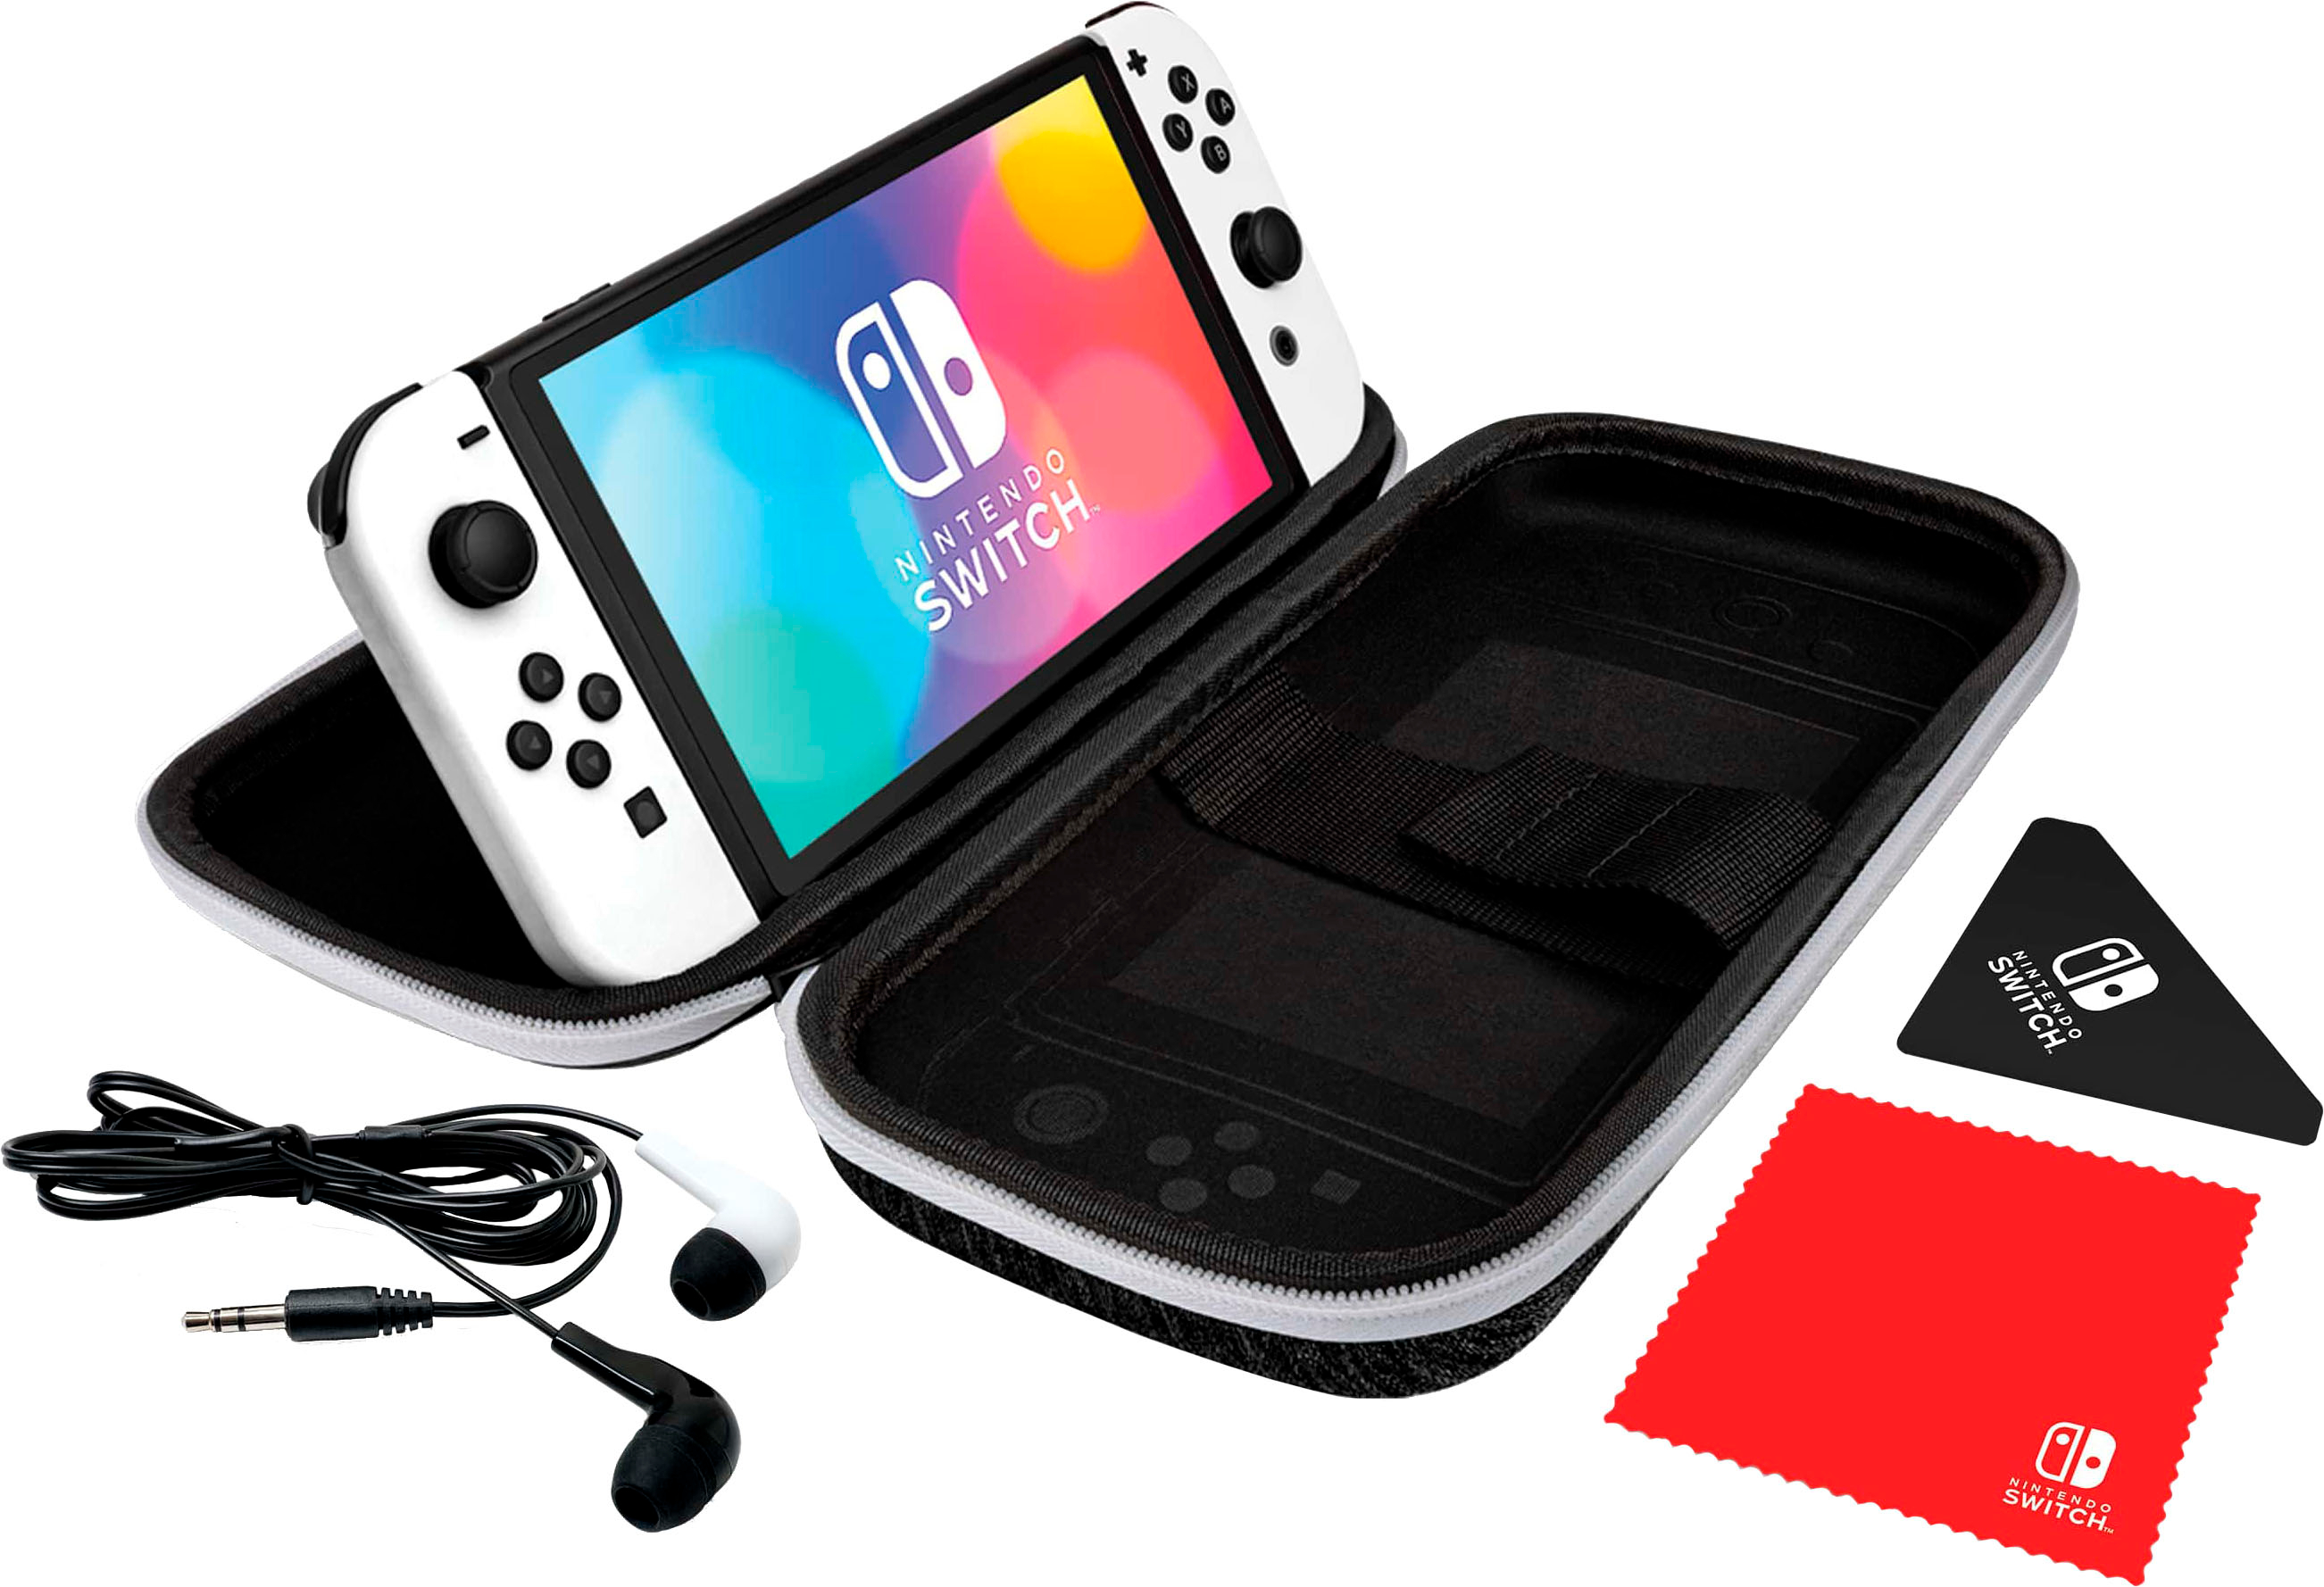 Nintendo Switch's Black Friday deal is the ideal Switch starter